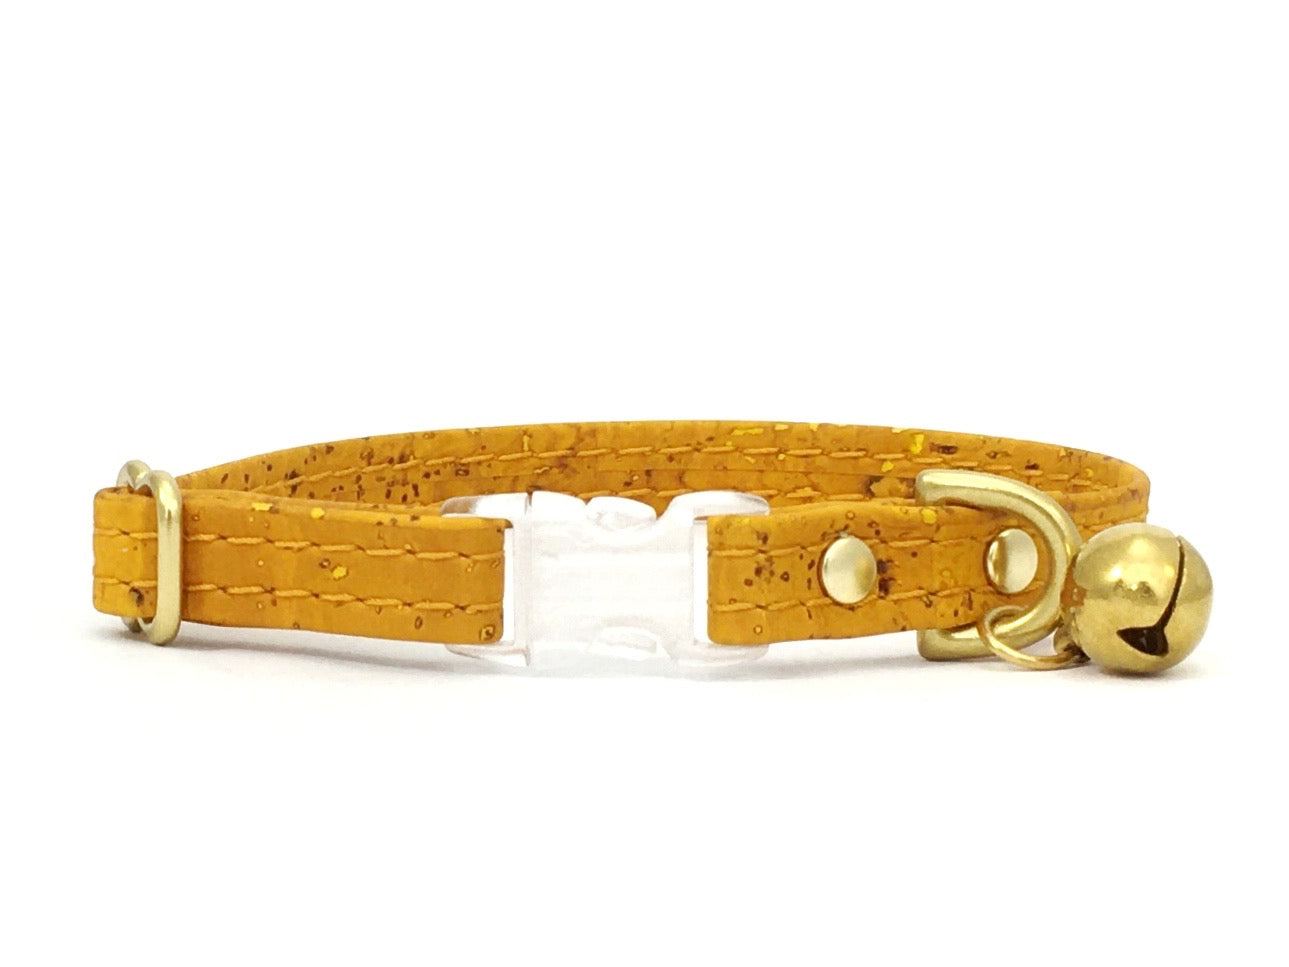 Mustard yellow vegan cork leather cat collar with breakaway buckle and luxury brass bell, made in the UK.